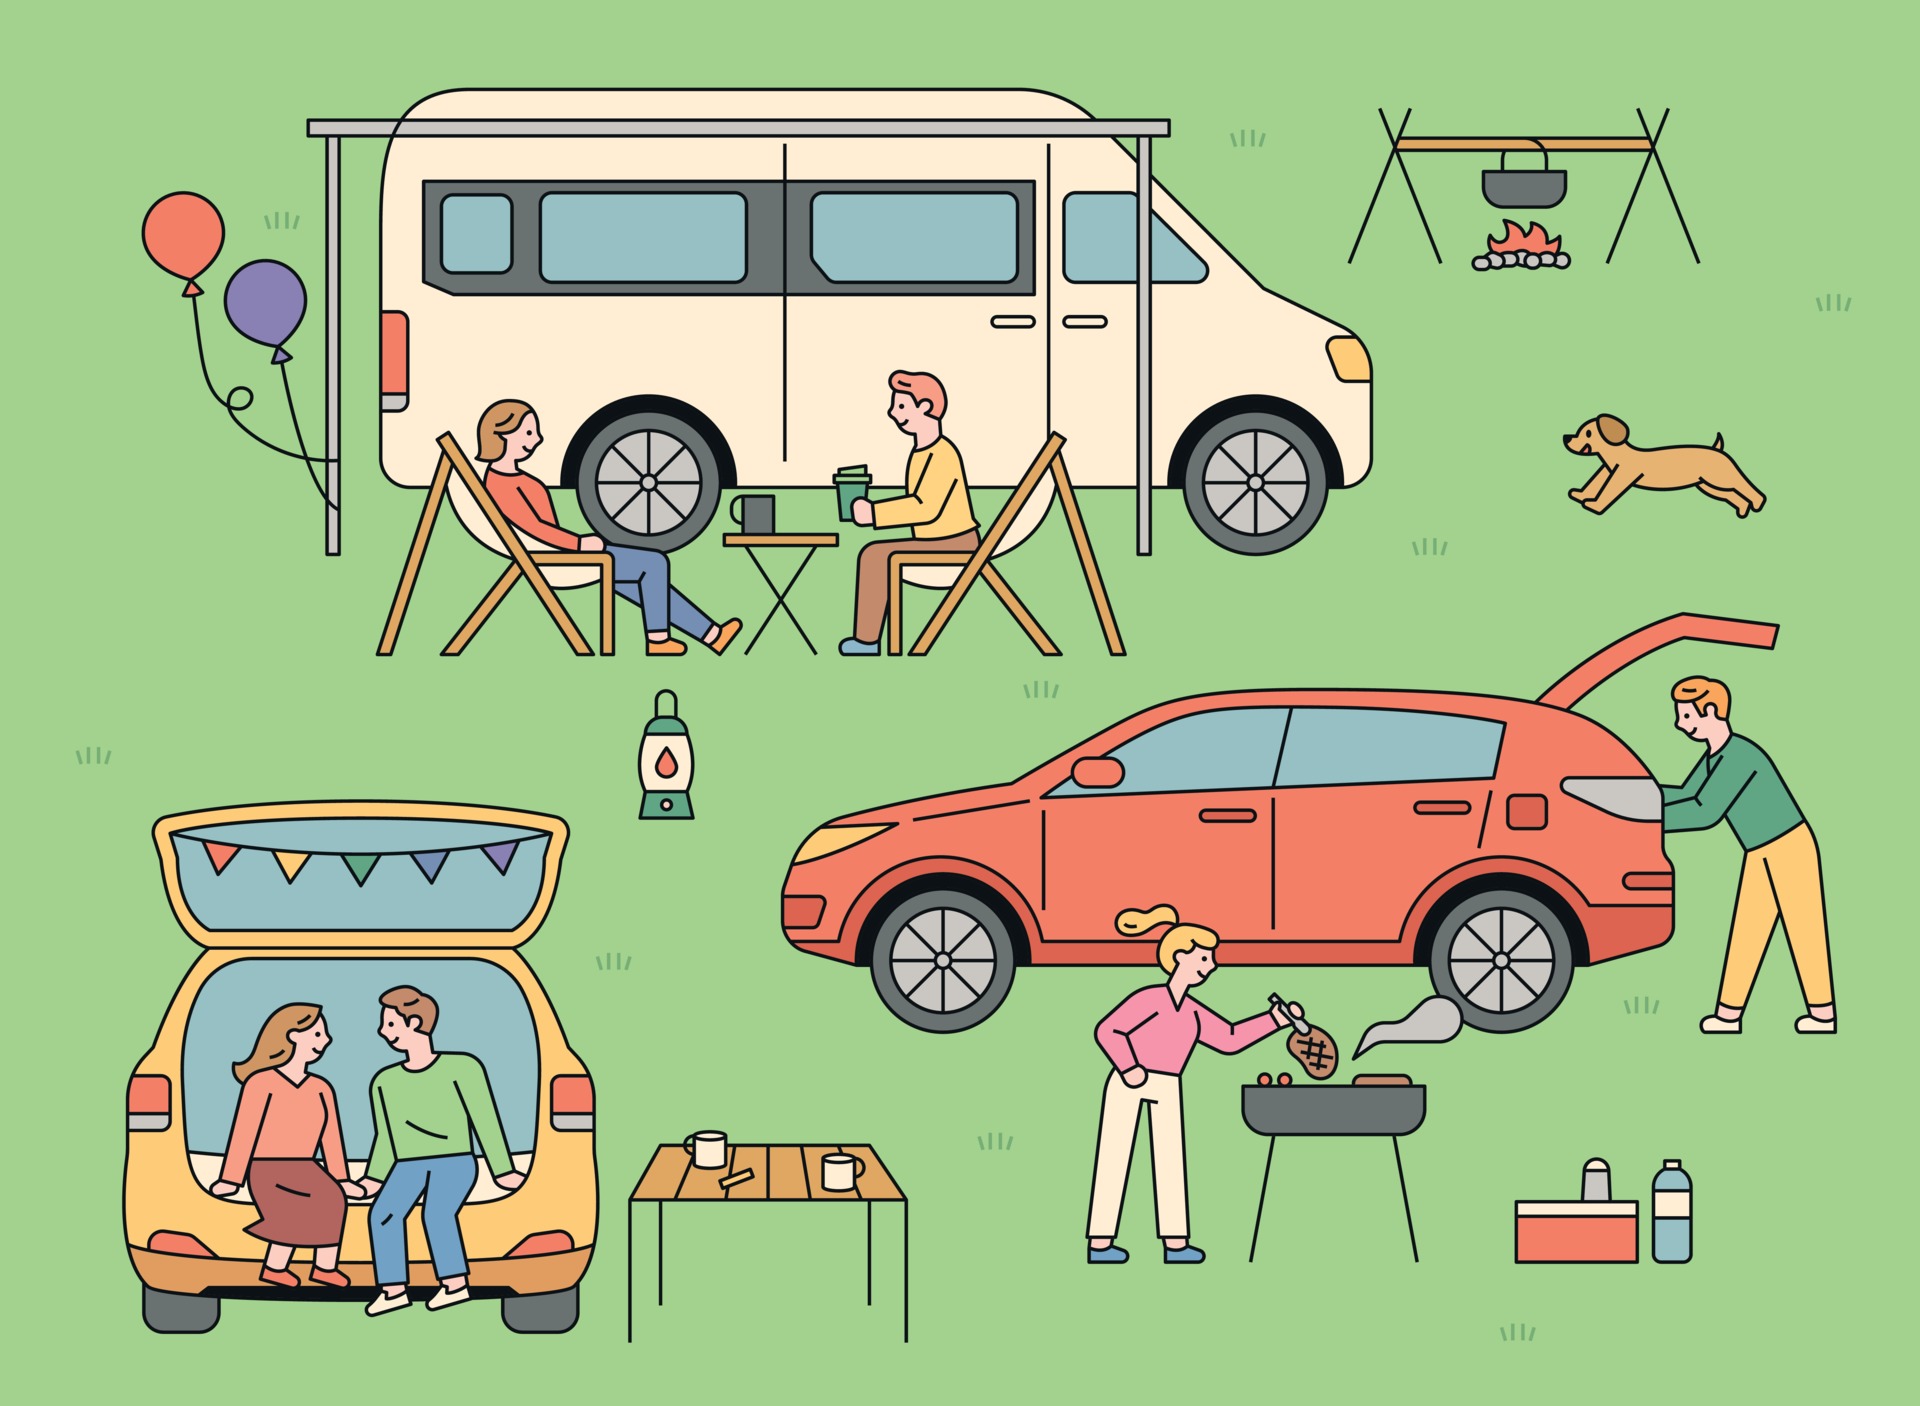 https://static.vecteezy.com/system/resources/previews/002/048/411/original/people-who-enjoy-auto-camping-outdoors-people-are-camping-in-vans-and-cars-vector.jpg